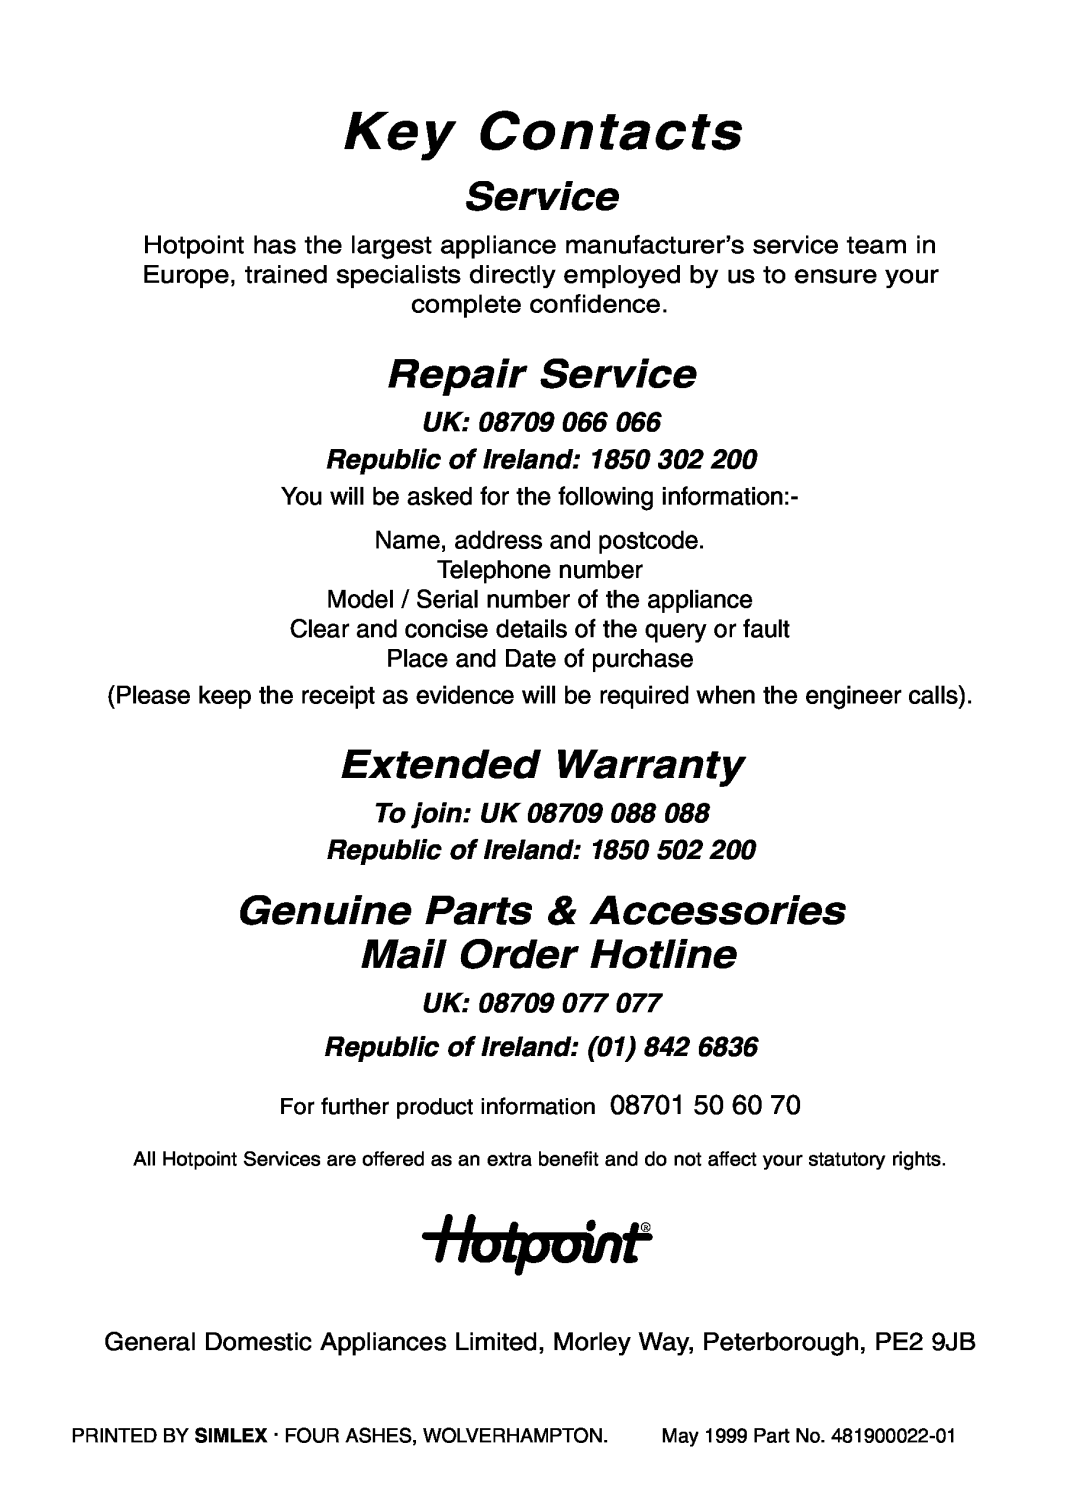 Hotpoint BS41X manual Key Contacts, Repair Service, Extended Warranty, Genuine Parts & Accessories Mail Order Hotline 